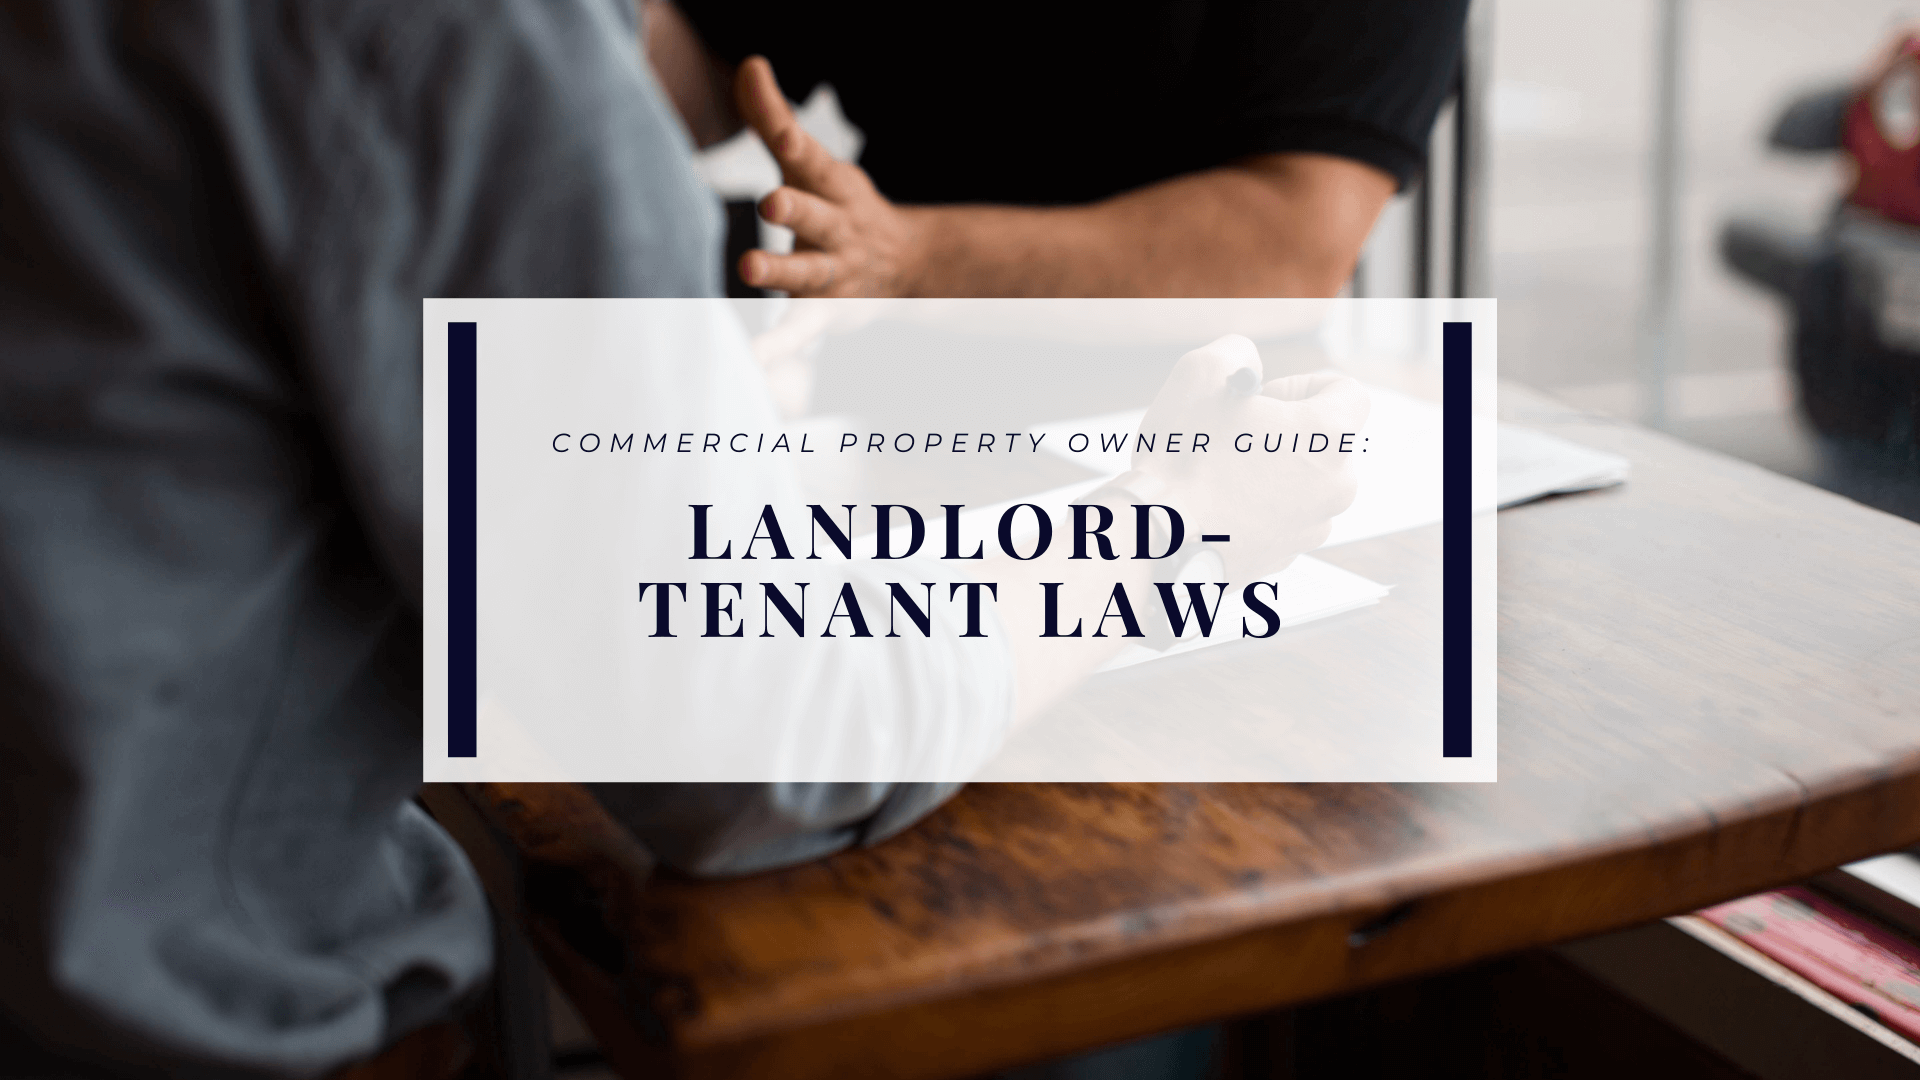 What LA County Commercial Property Owners Need to Understand about Landlord-Tenant Laws